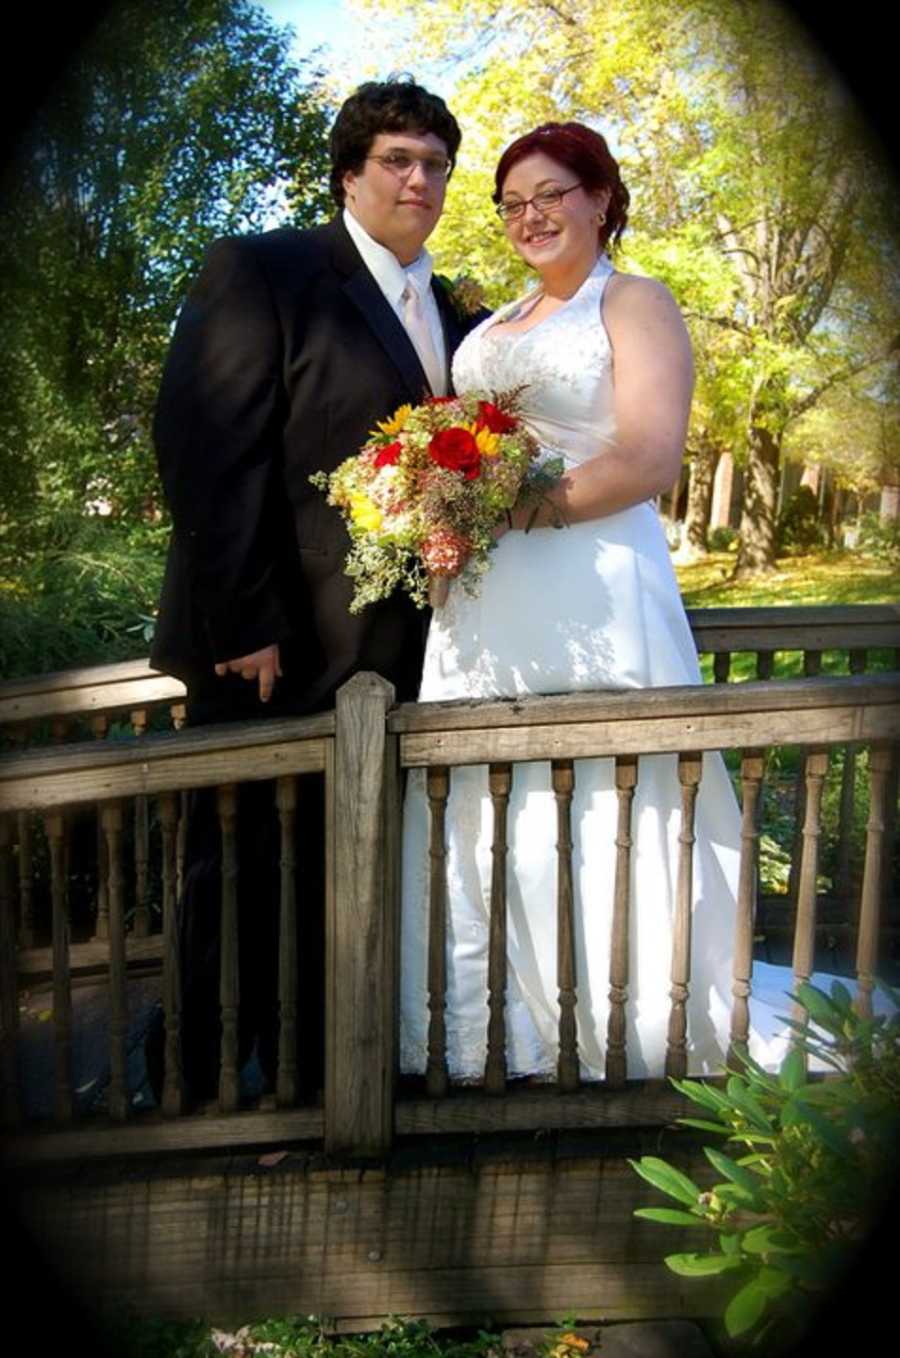 Bride with eating disorder stands on wooden bridge smiling beside groom